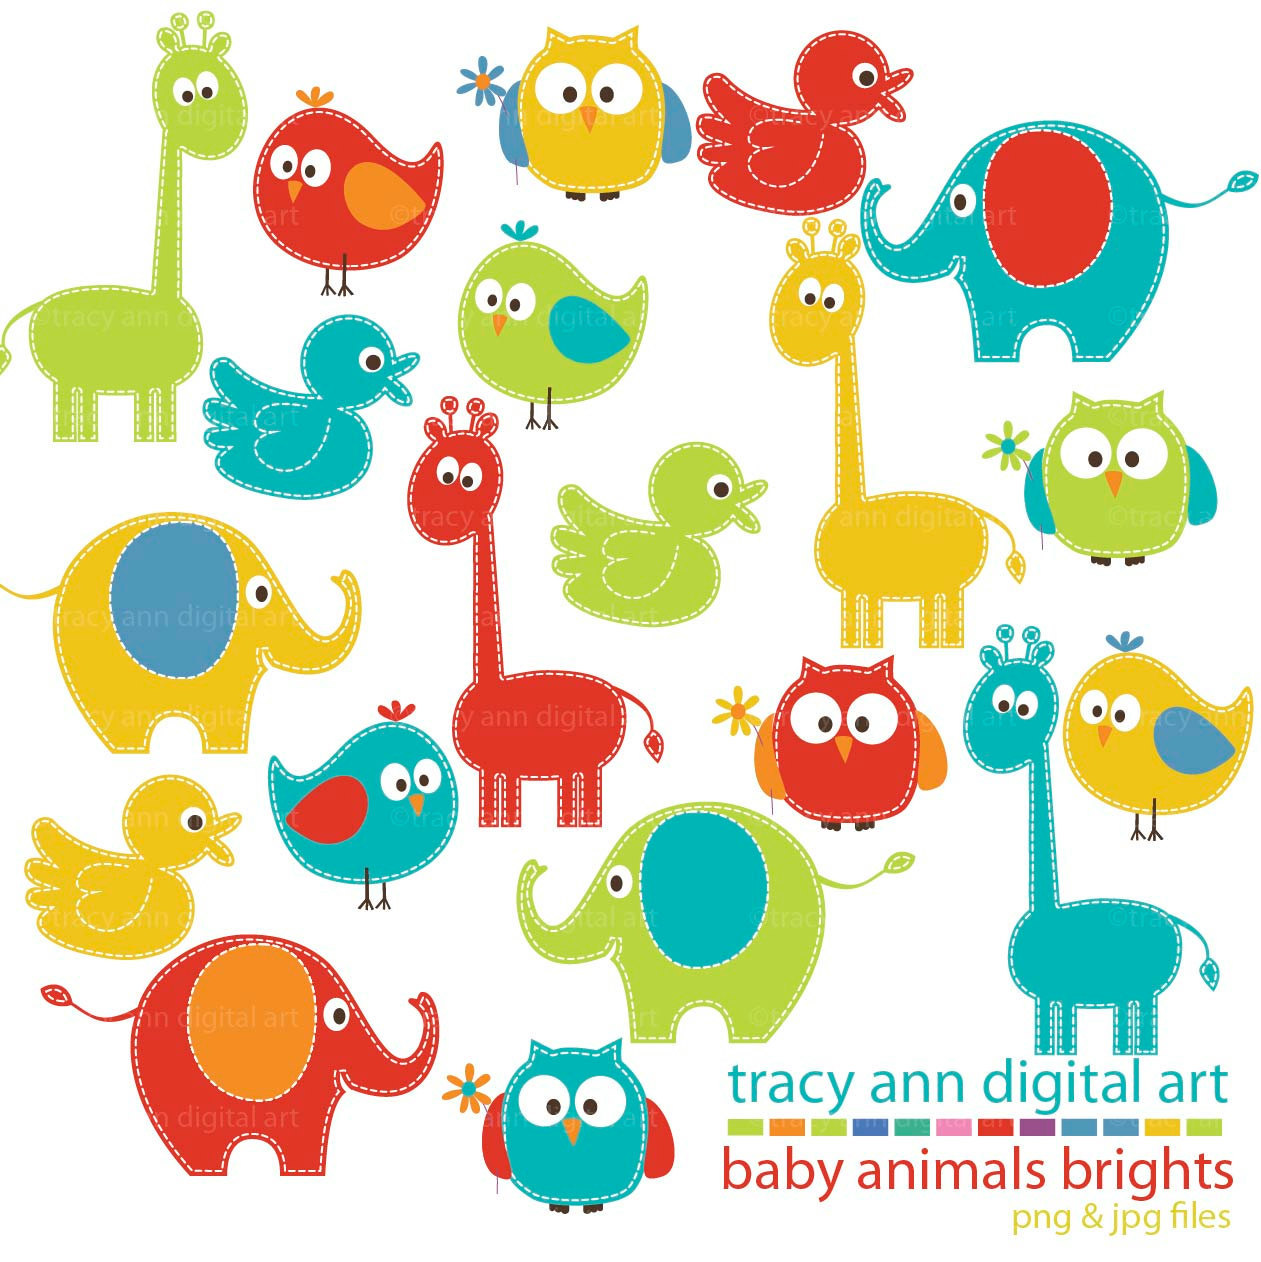 baby animal clipart free download - photo #2